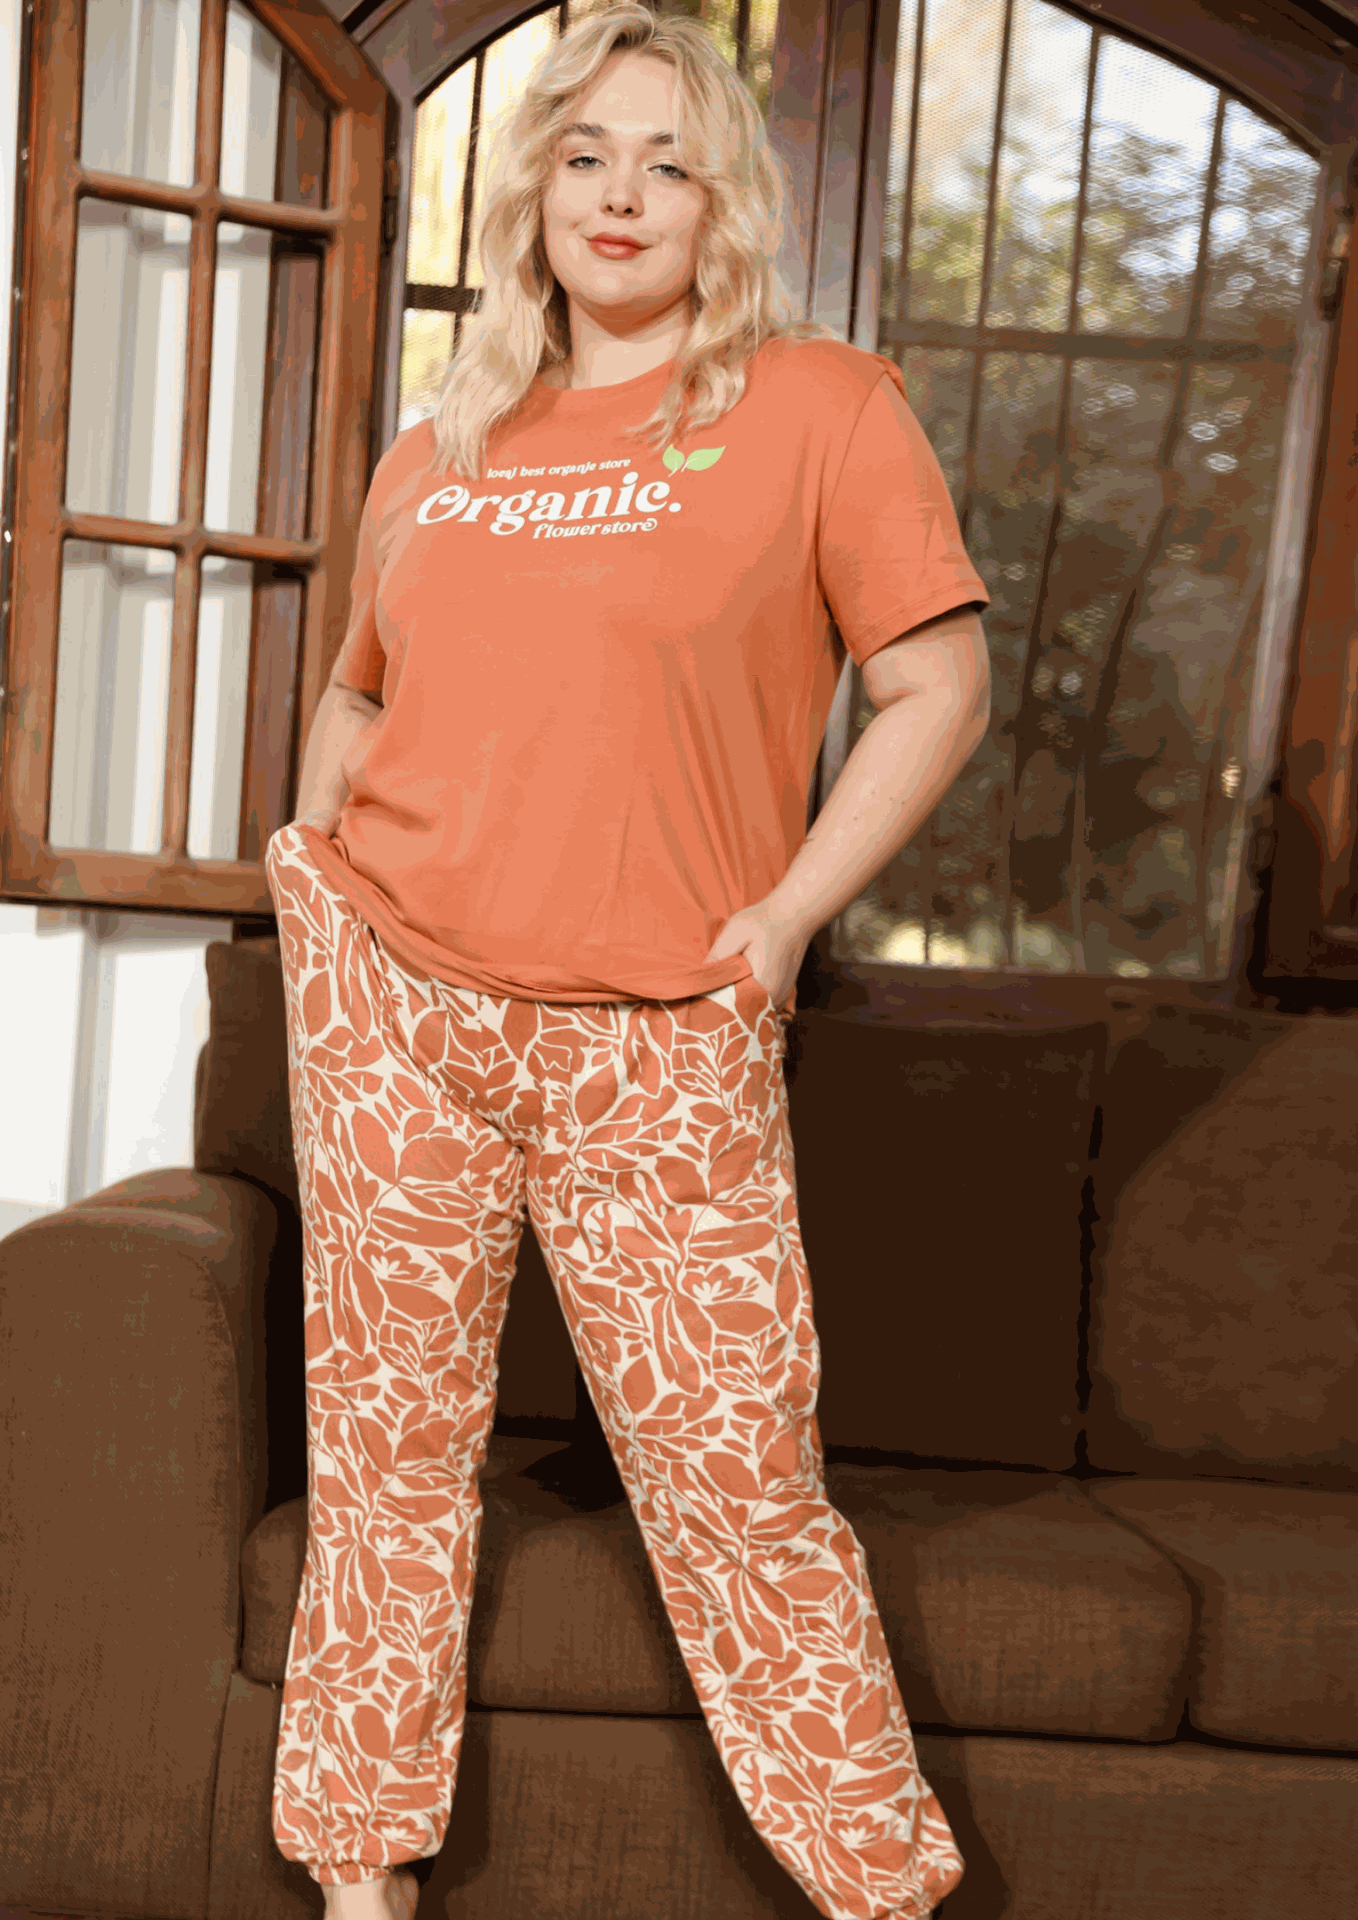 organic flower store Women's pajamas with half-sleeved T-shirt and printed pants